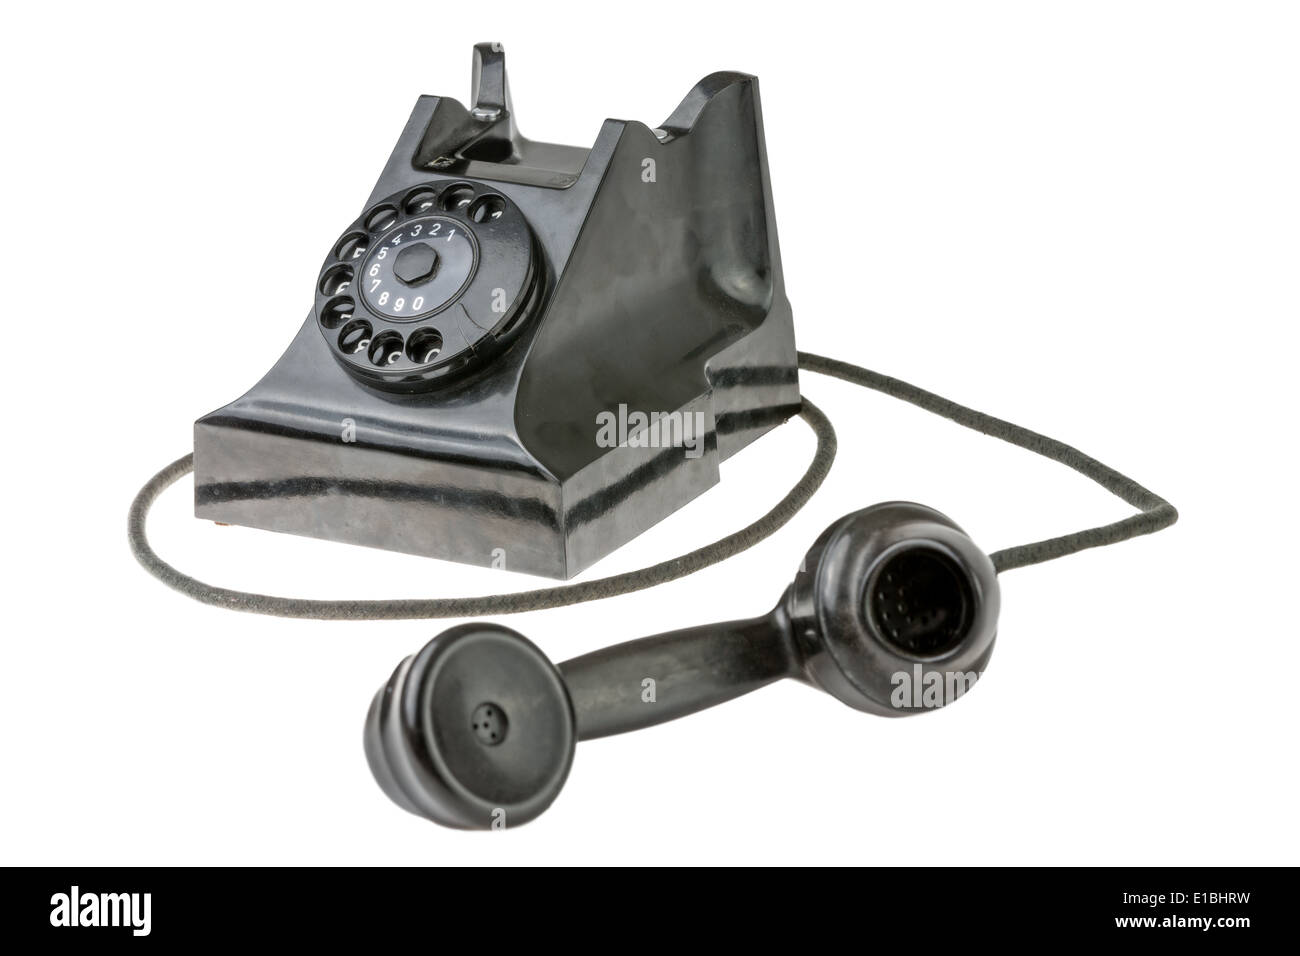 Retro dial-up rotary telephone with the handset lying in the foreground turned towards the camera on a white studio background Stock Photo